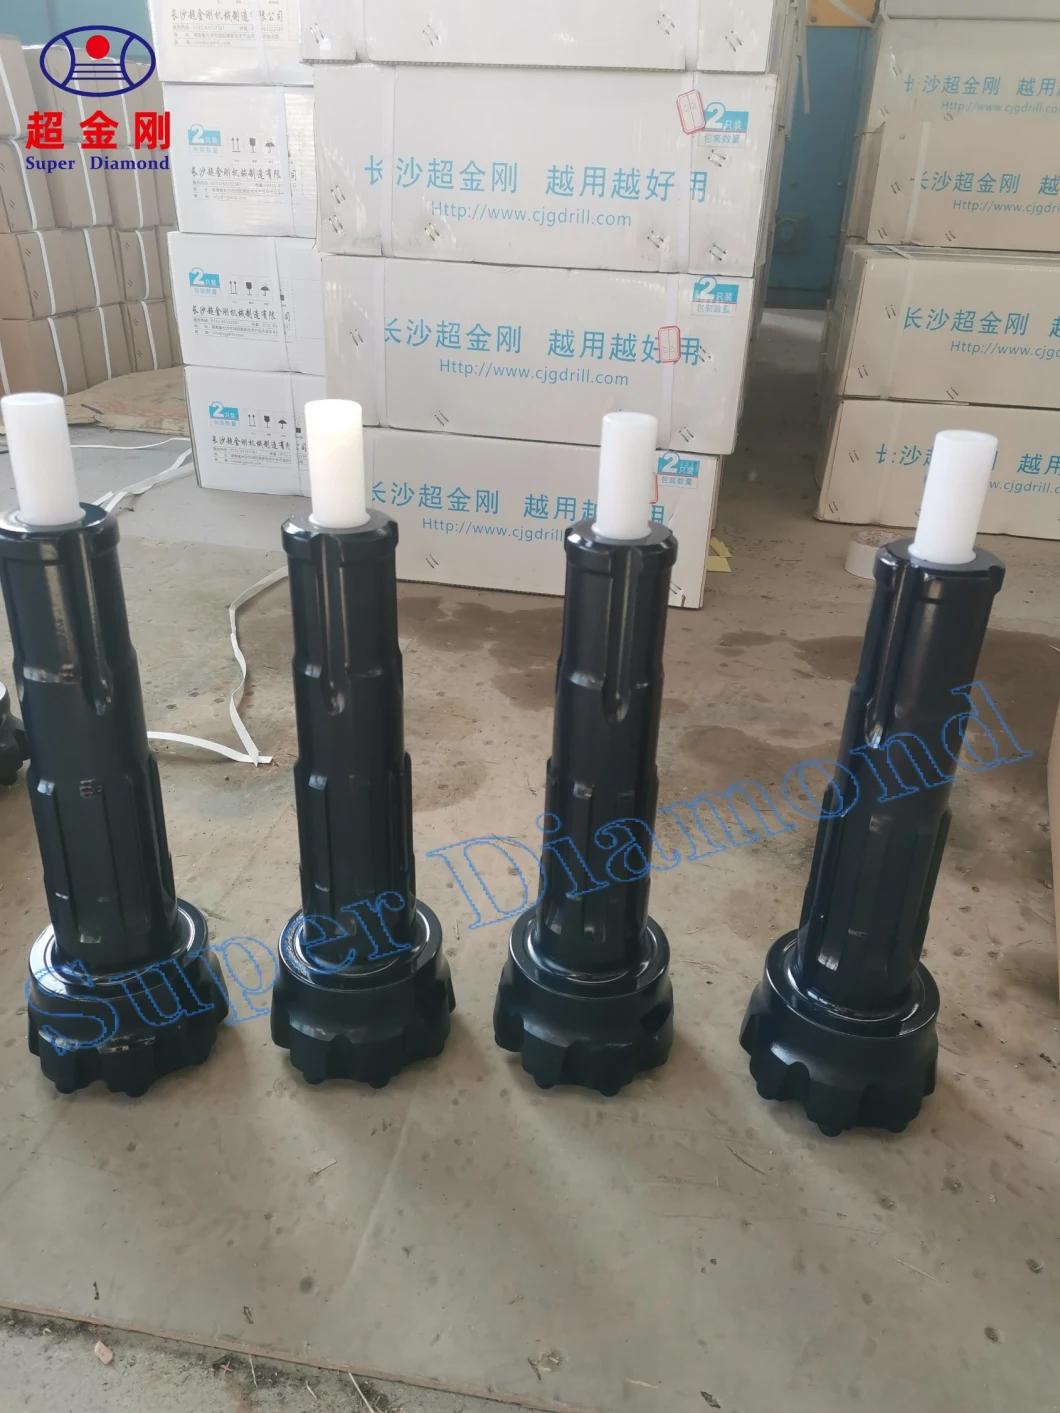 High Quality China Manufacturer M50 Rock Drill Bit for 5inch DTH Hammer